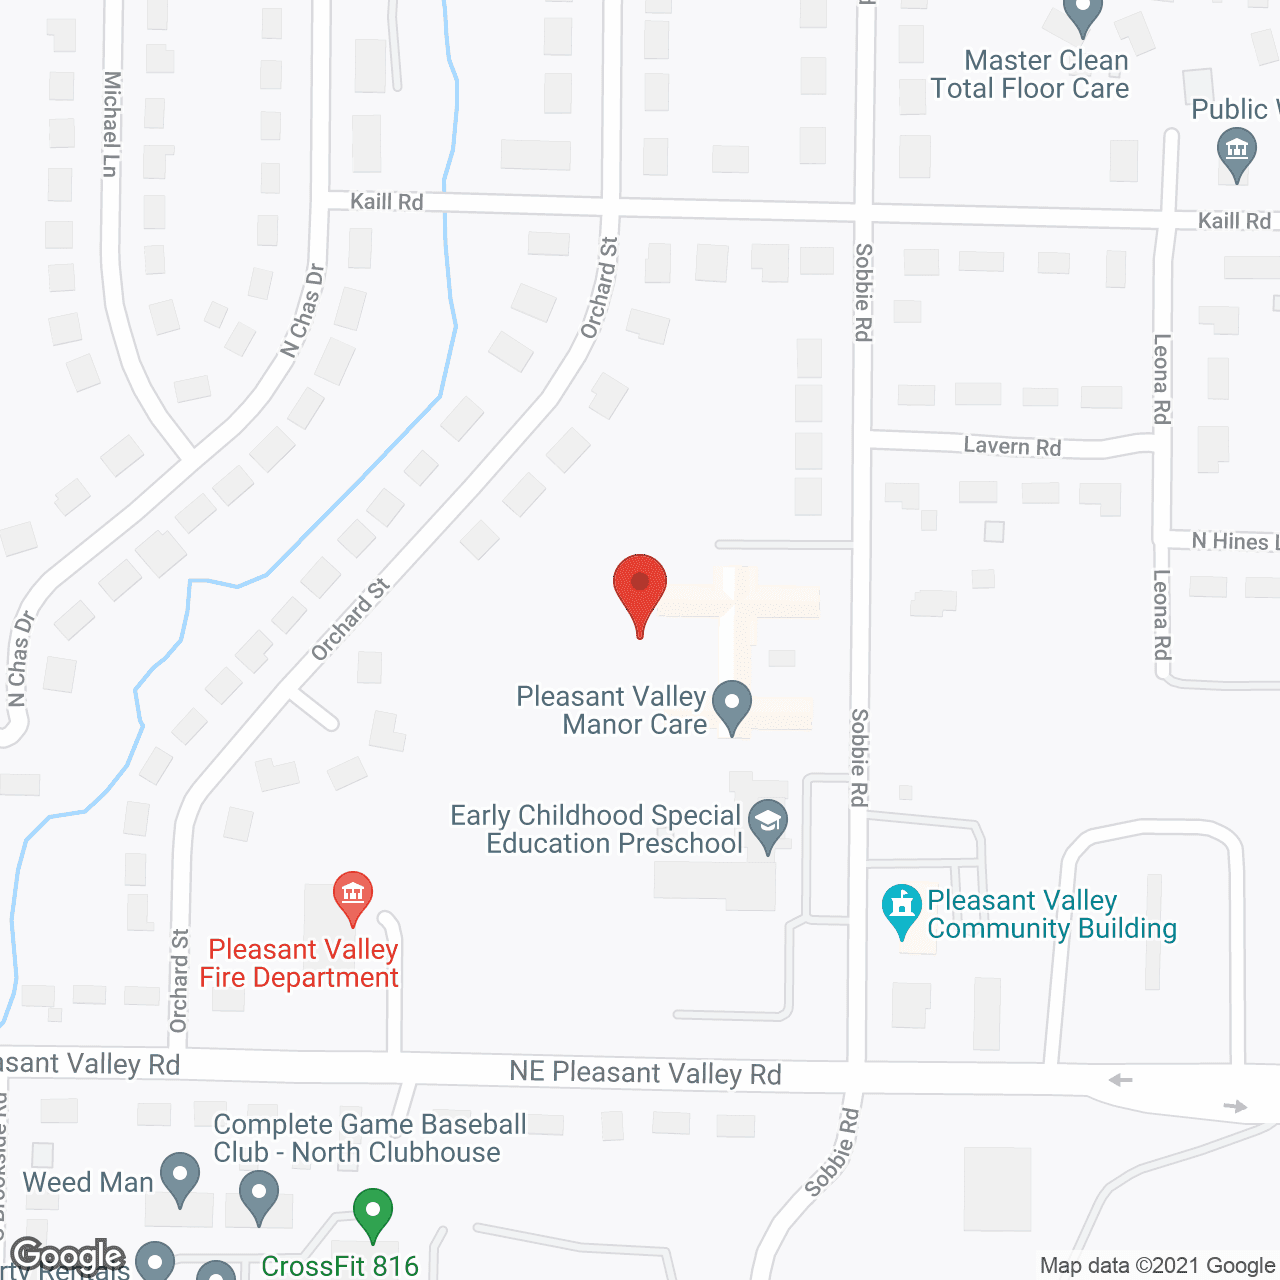 Pleasant Valley Manor Care Ctr in google map